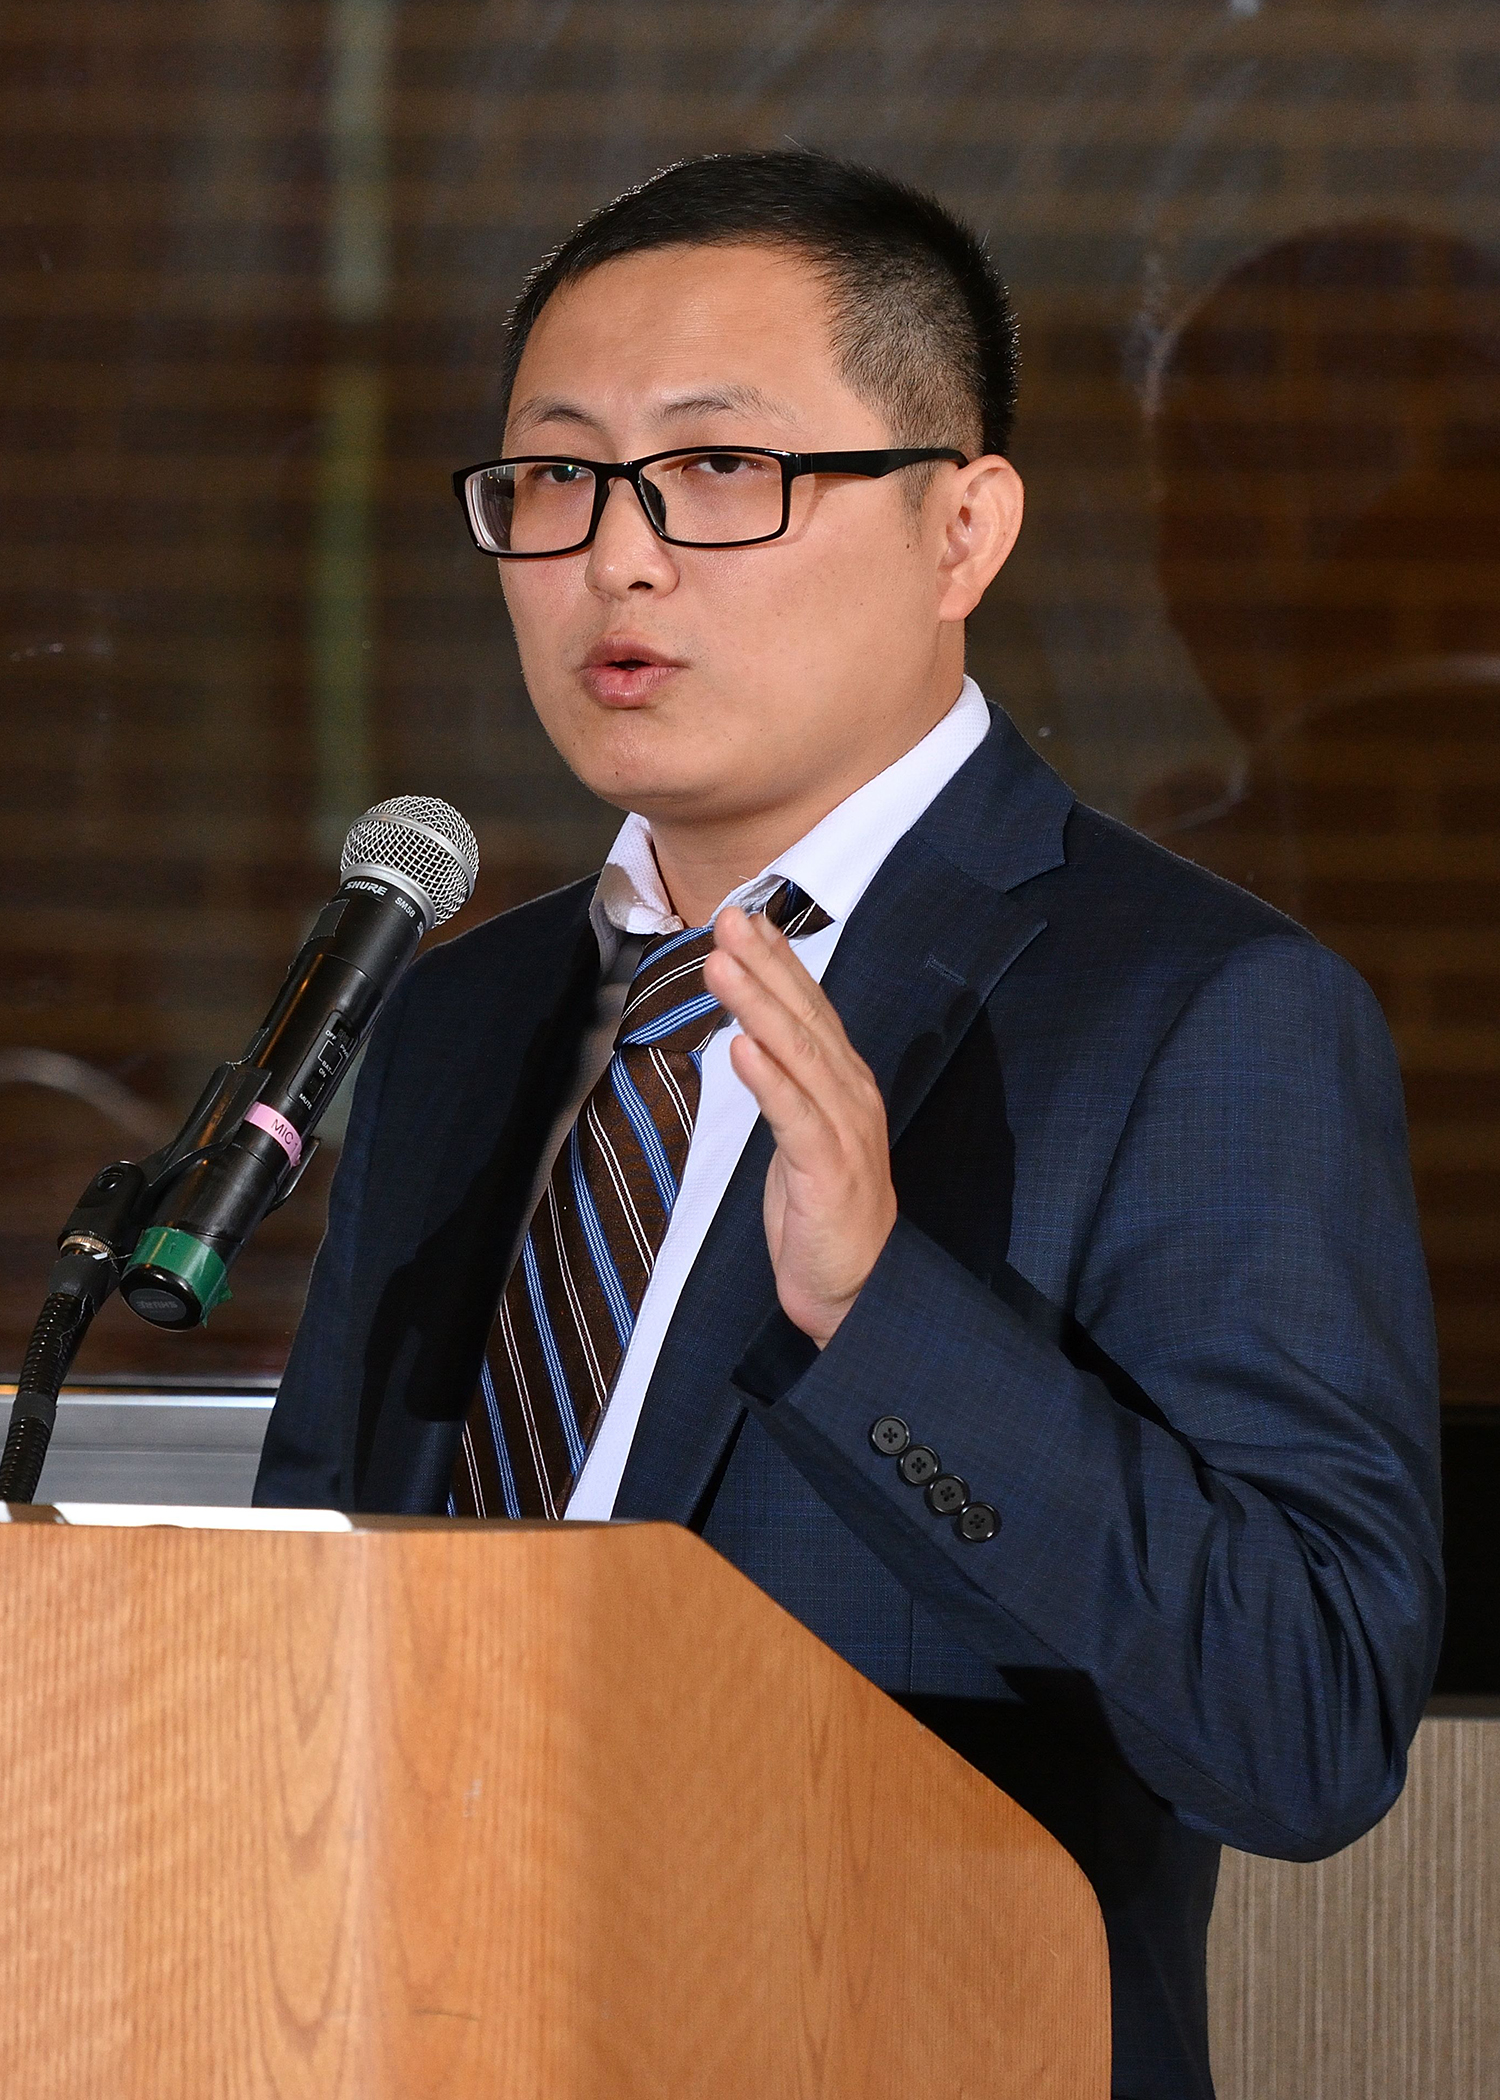 Tuo Wang speaks about his research during the Sept. 28 investiture ceremony. James Hoeschele established the Carl H. Brubaker, Jr. Endowed Professorship in 2022, with the goal of recruiting and retaining outstanding faculty members in the MSU Department of Chemistry. Photo Credit: Harley Seeley 